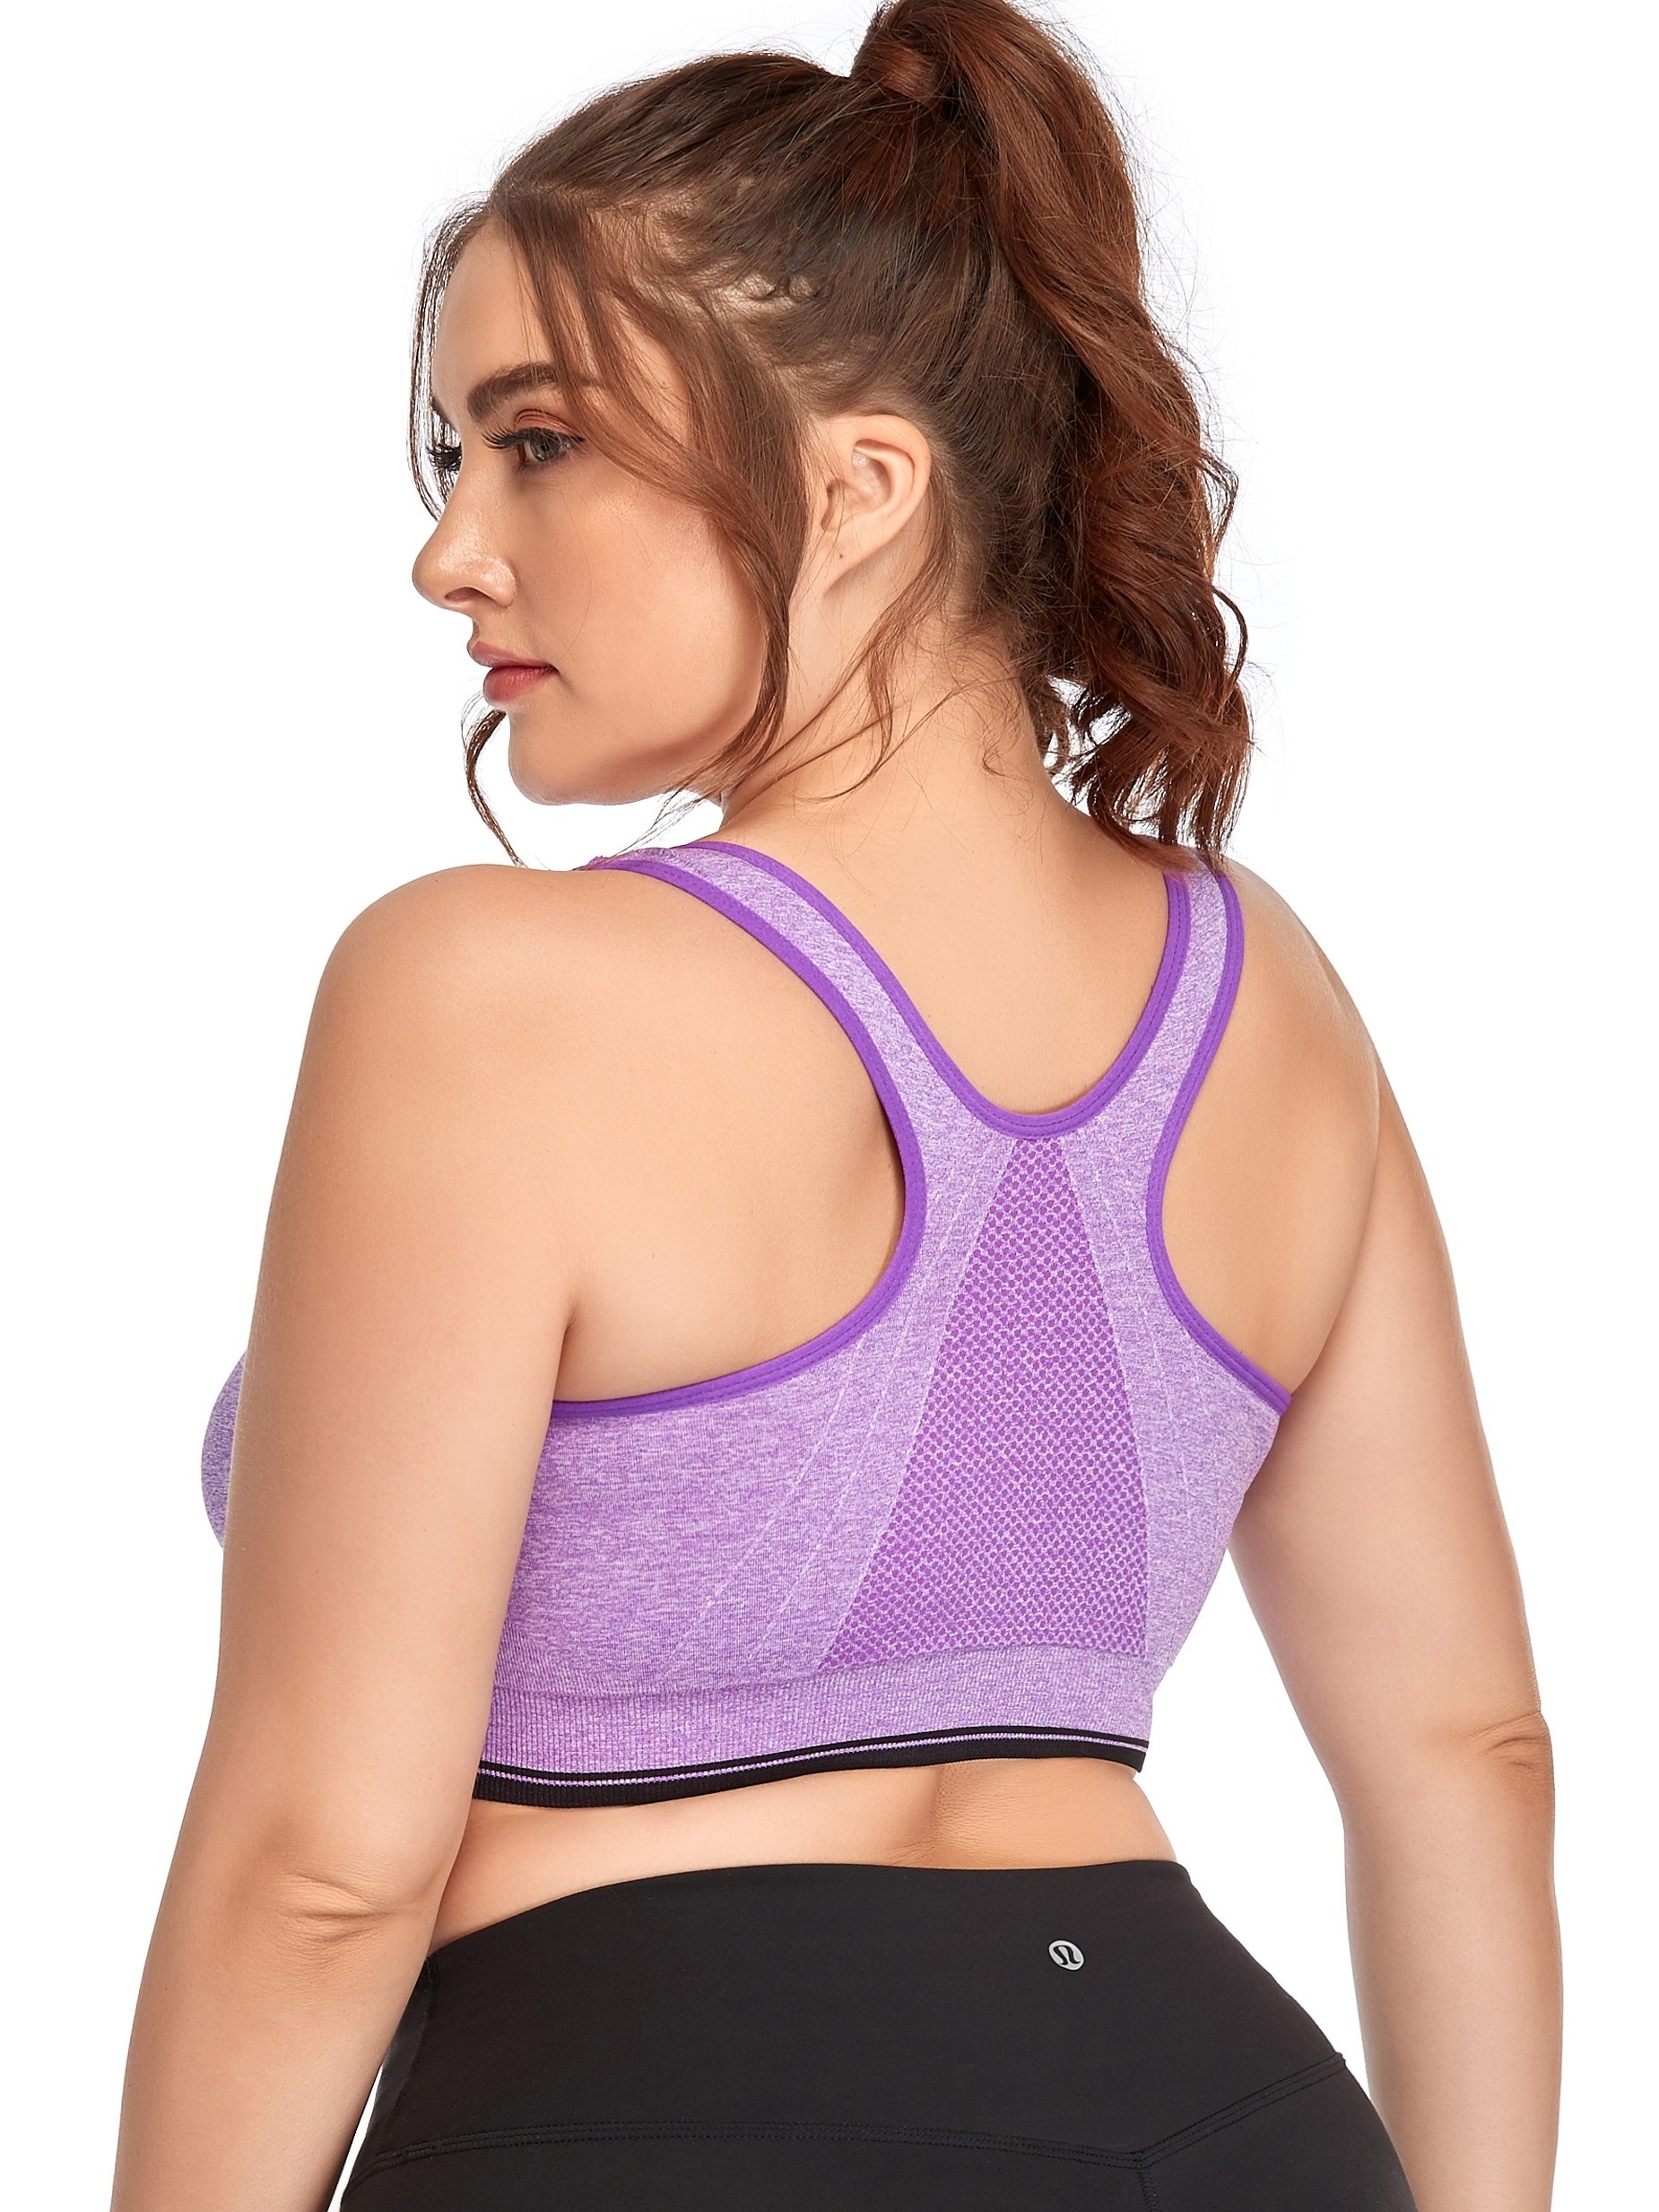 High Impact Sports Bras for Women, Shockproof Sports Bras for Women Plus  Size, for Running, Gym, Sports, Fitness (Color : Purple, Size : Medium)